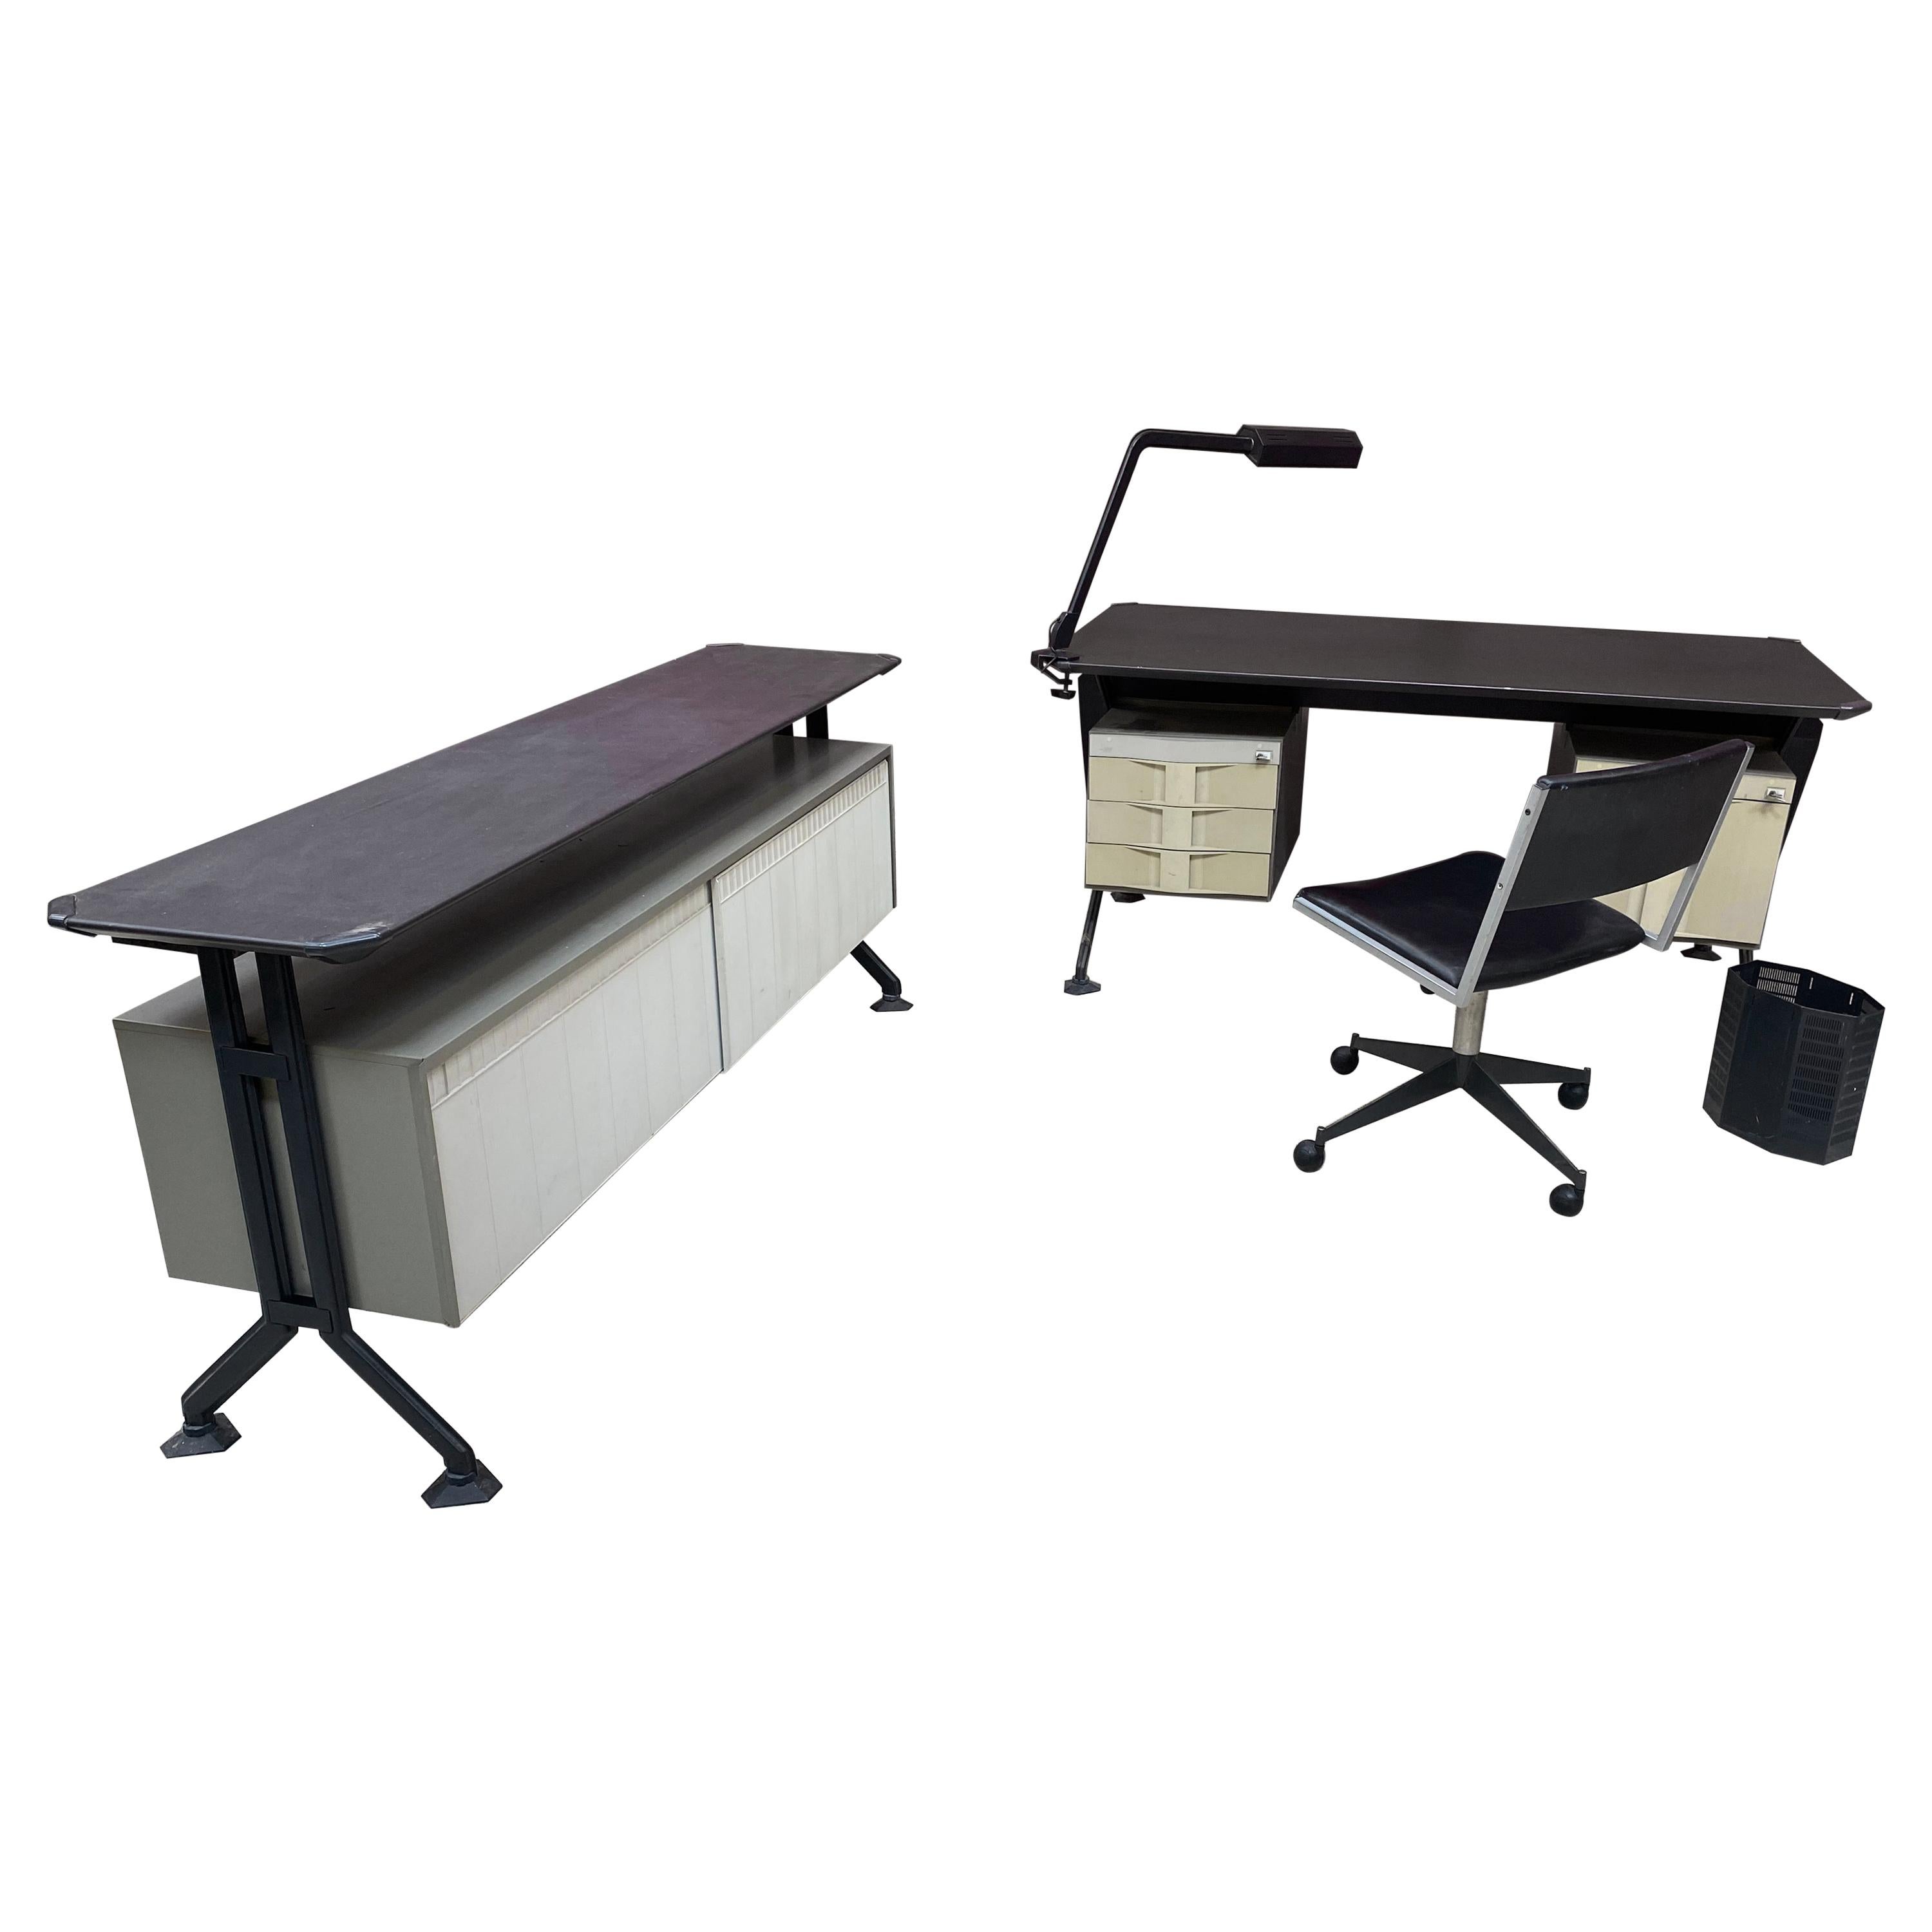 Rare Desk Set by BBPR for Olivetti Synthesis, circa 1960